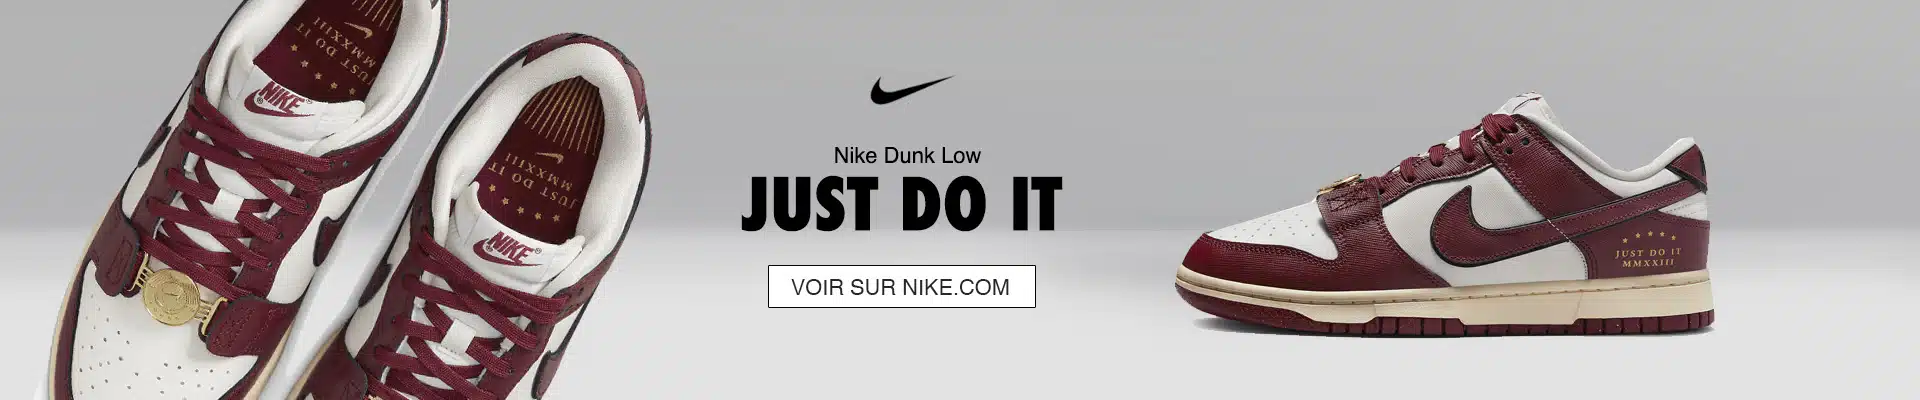 Nike Dunk Low Just do it